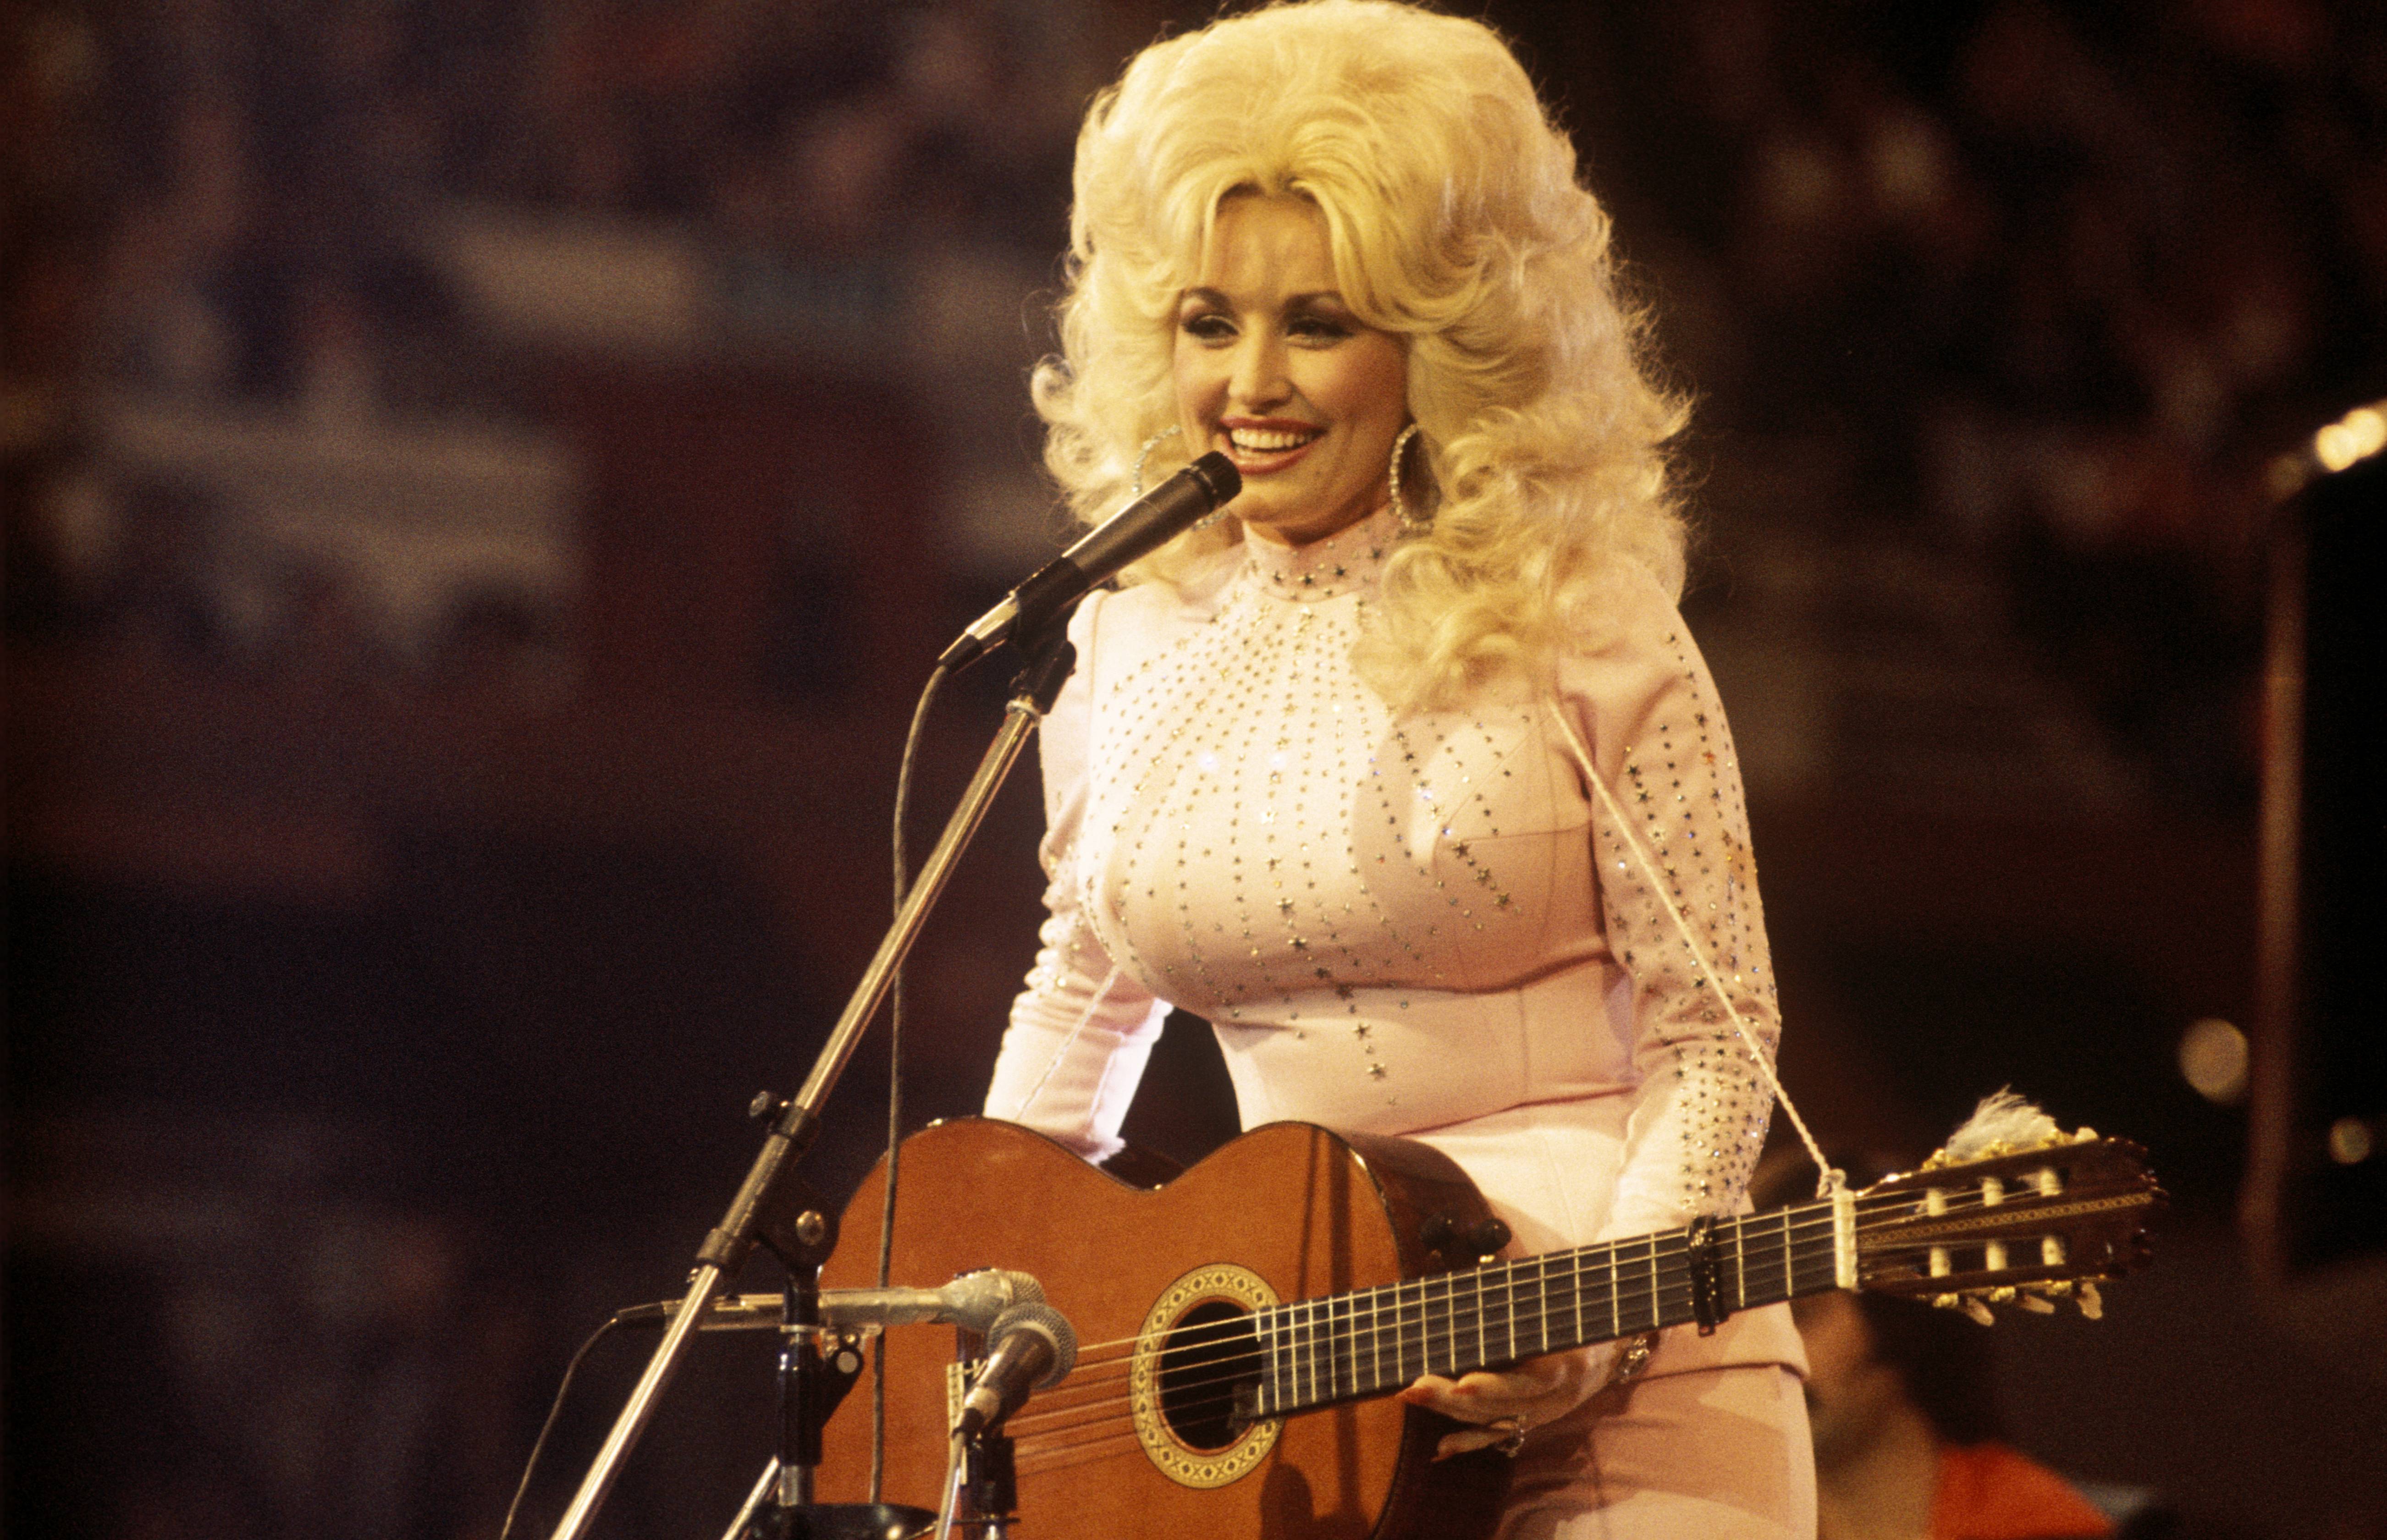 Dolly Parton plays her guitar while performing in a jeweled, white outfit.